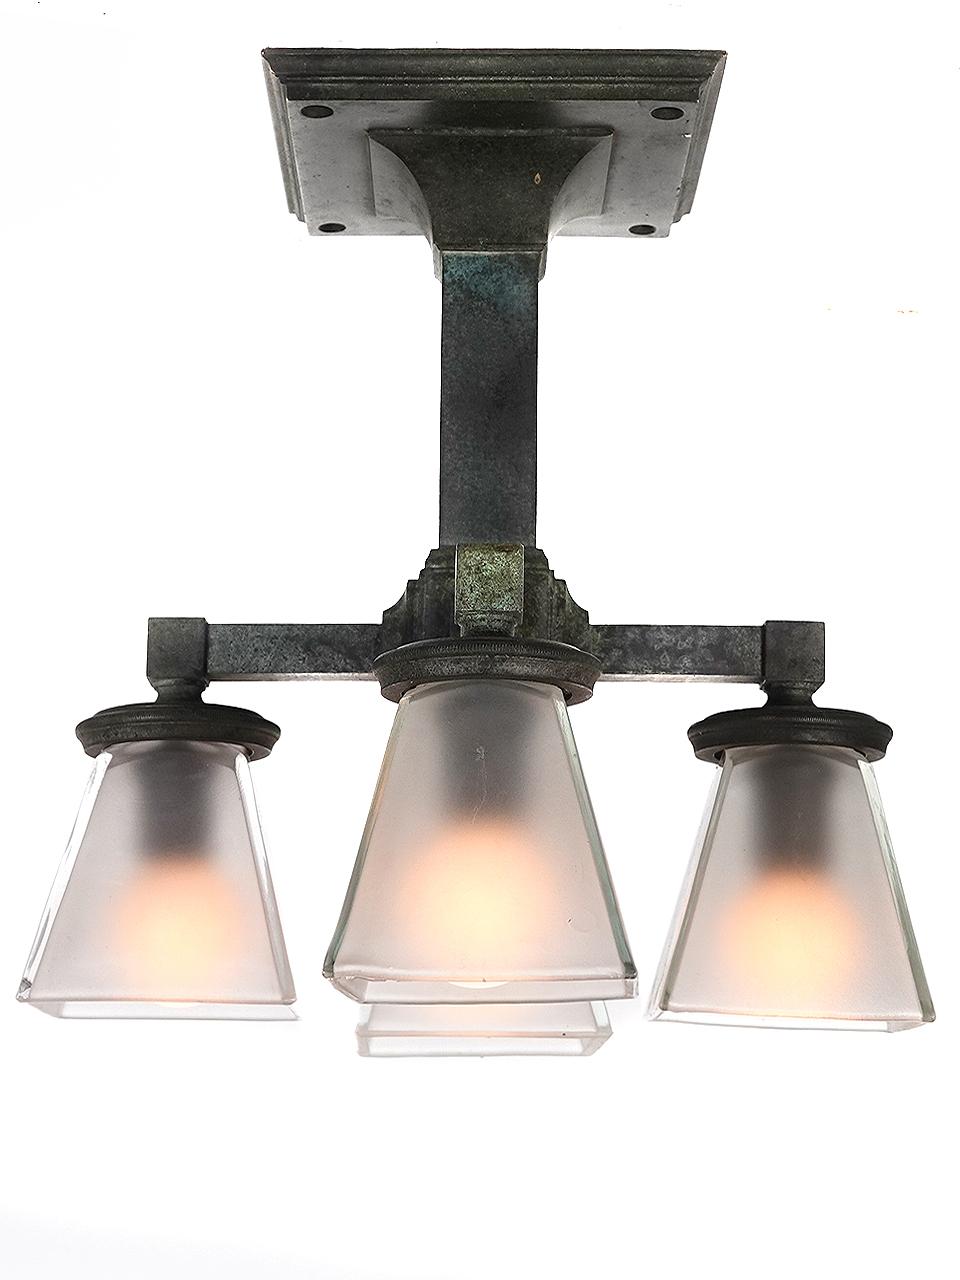 American Early Bronze Quad Subway Sconces For Sale